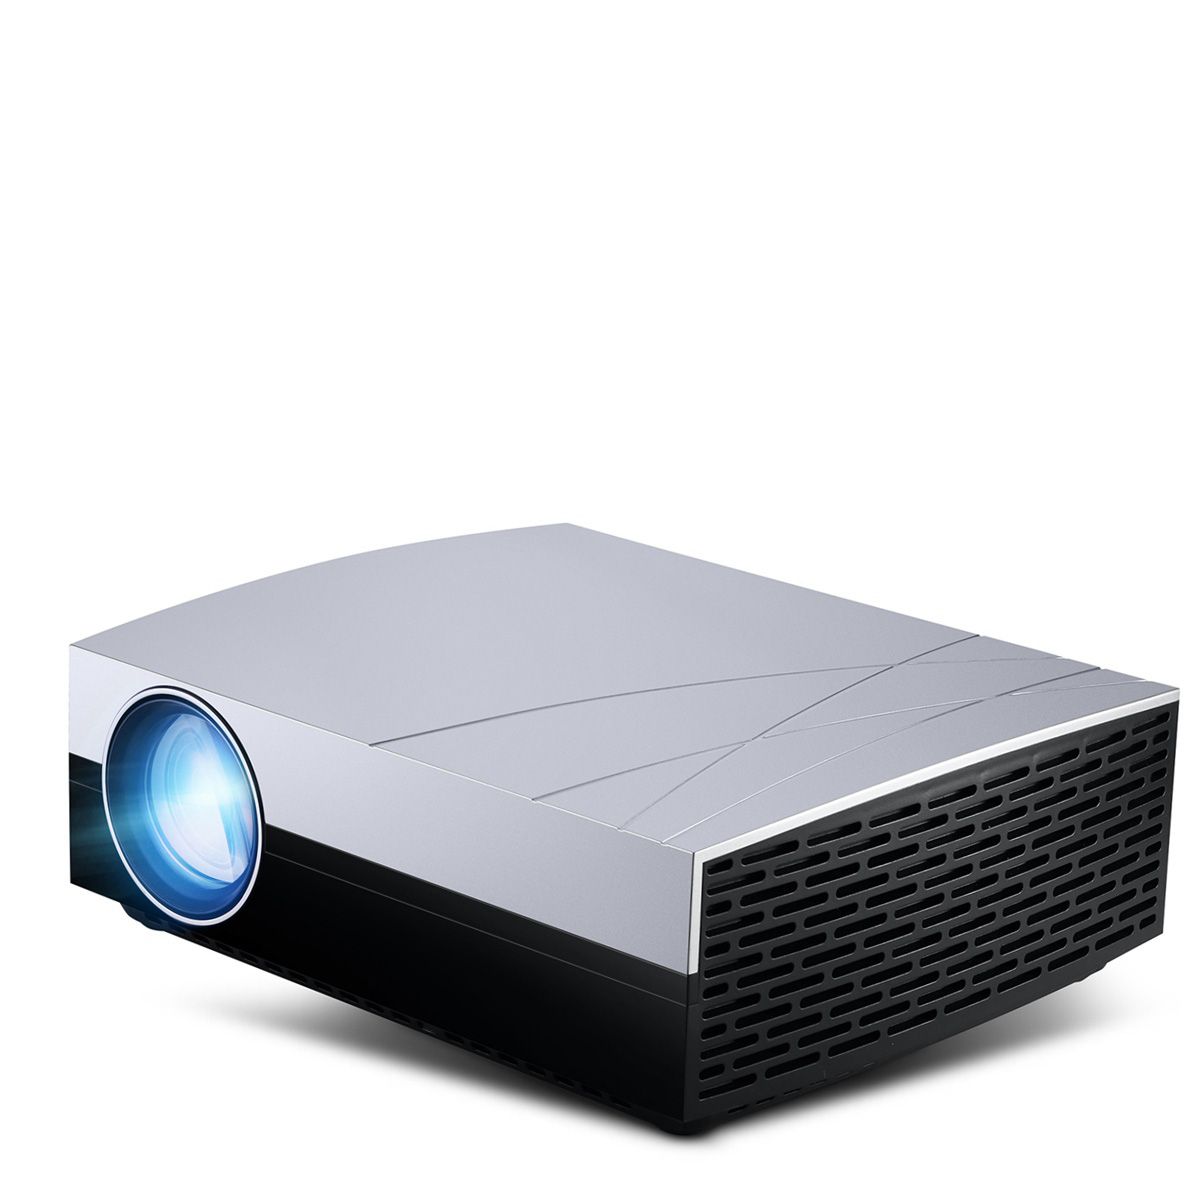 

Vivibright F20UP Projector Android 6.0 1280x800 HD 1080P 3000 Lumens 2000:1 Contrast Ratio LED Video Home Cinema Projector